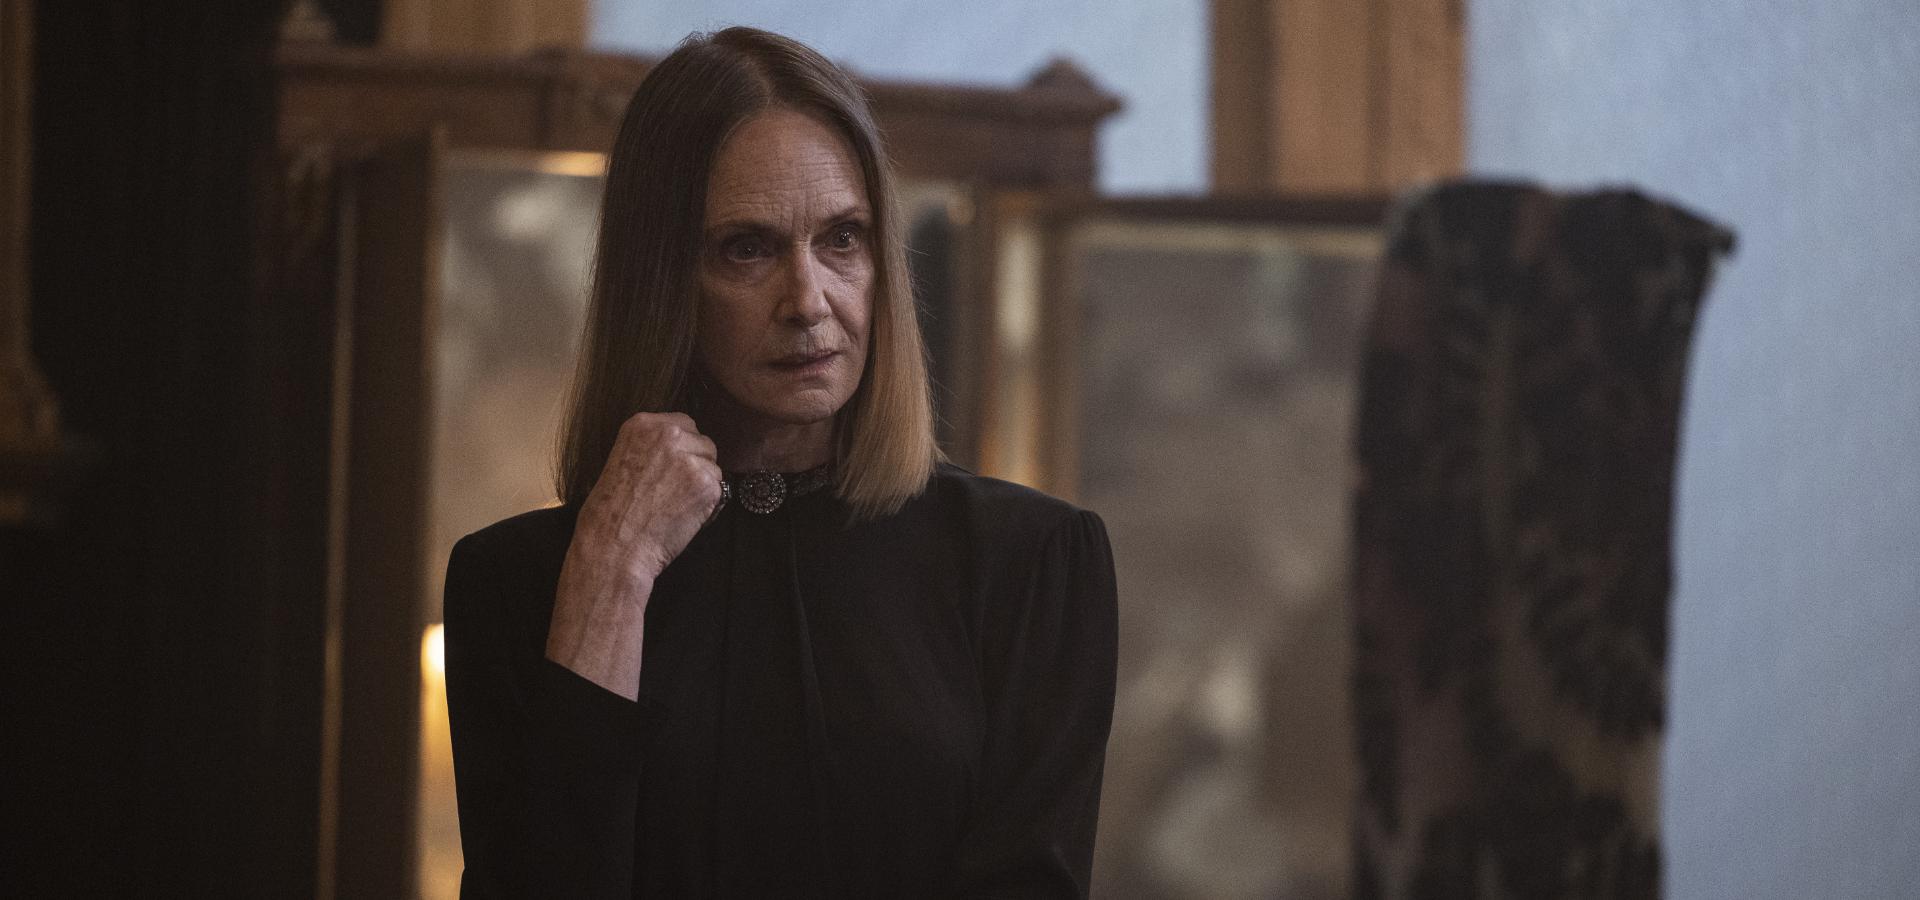 The Walking Dead: Dead City Q&A — Lisa Emery on Playing A "Delicious" Villain Like The Dama